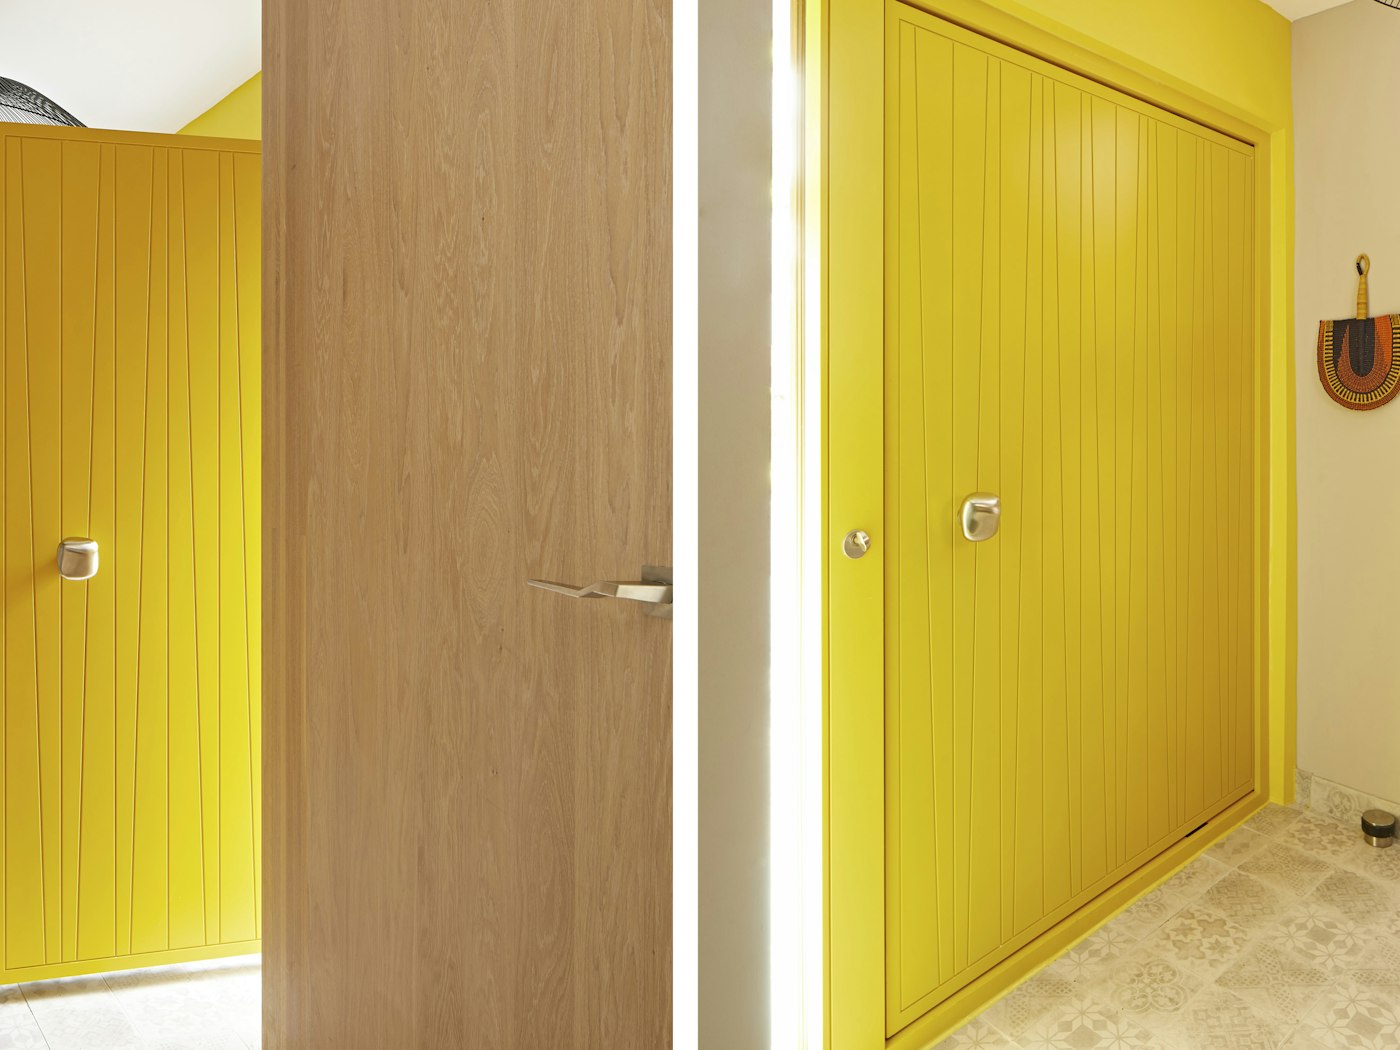 The internal side of this front door is in a milano V design and has been painted yellow